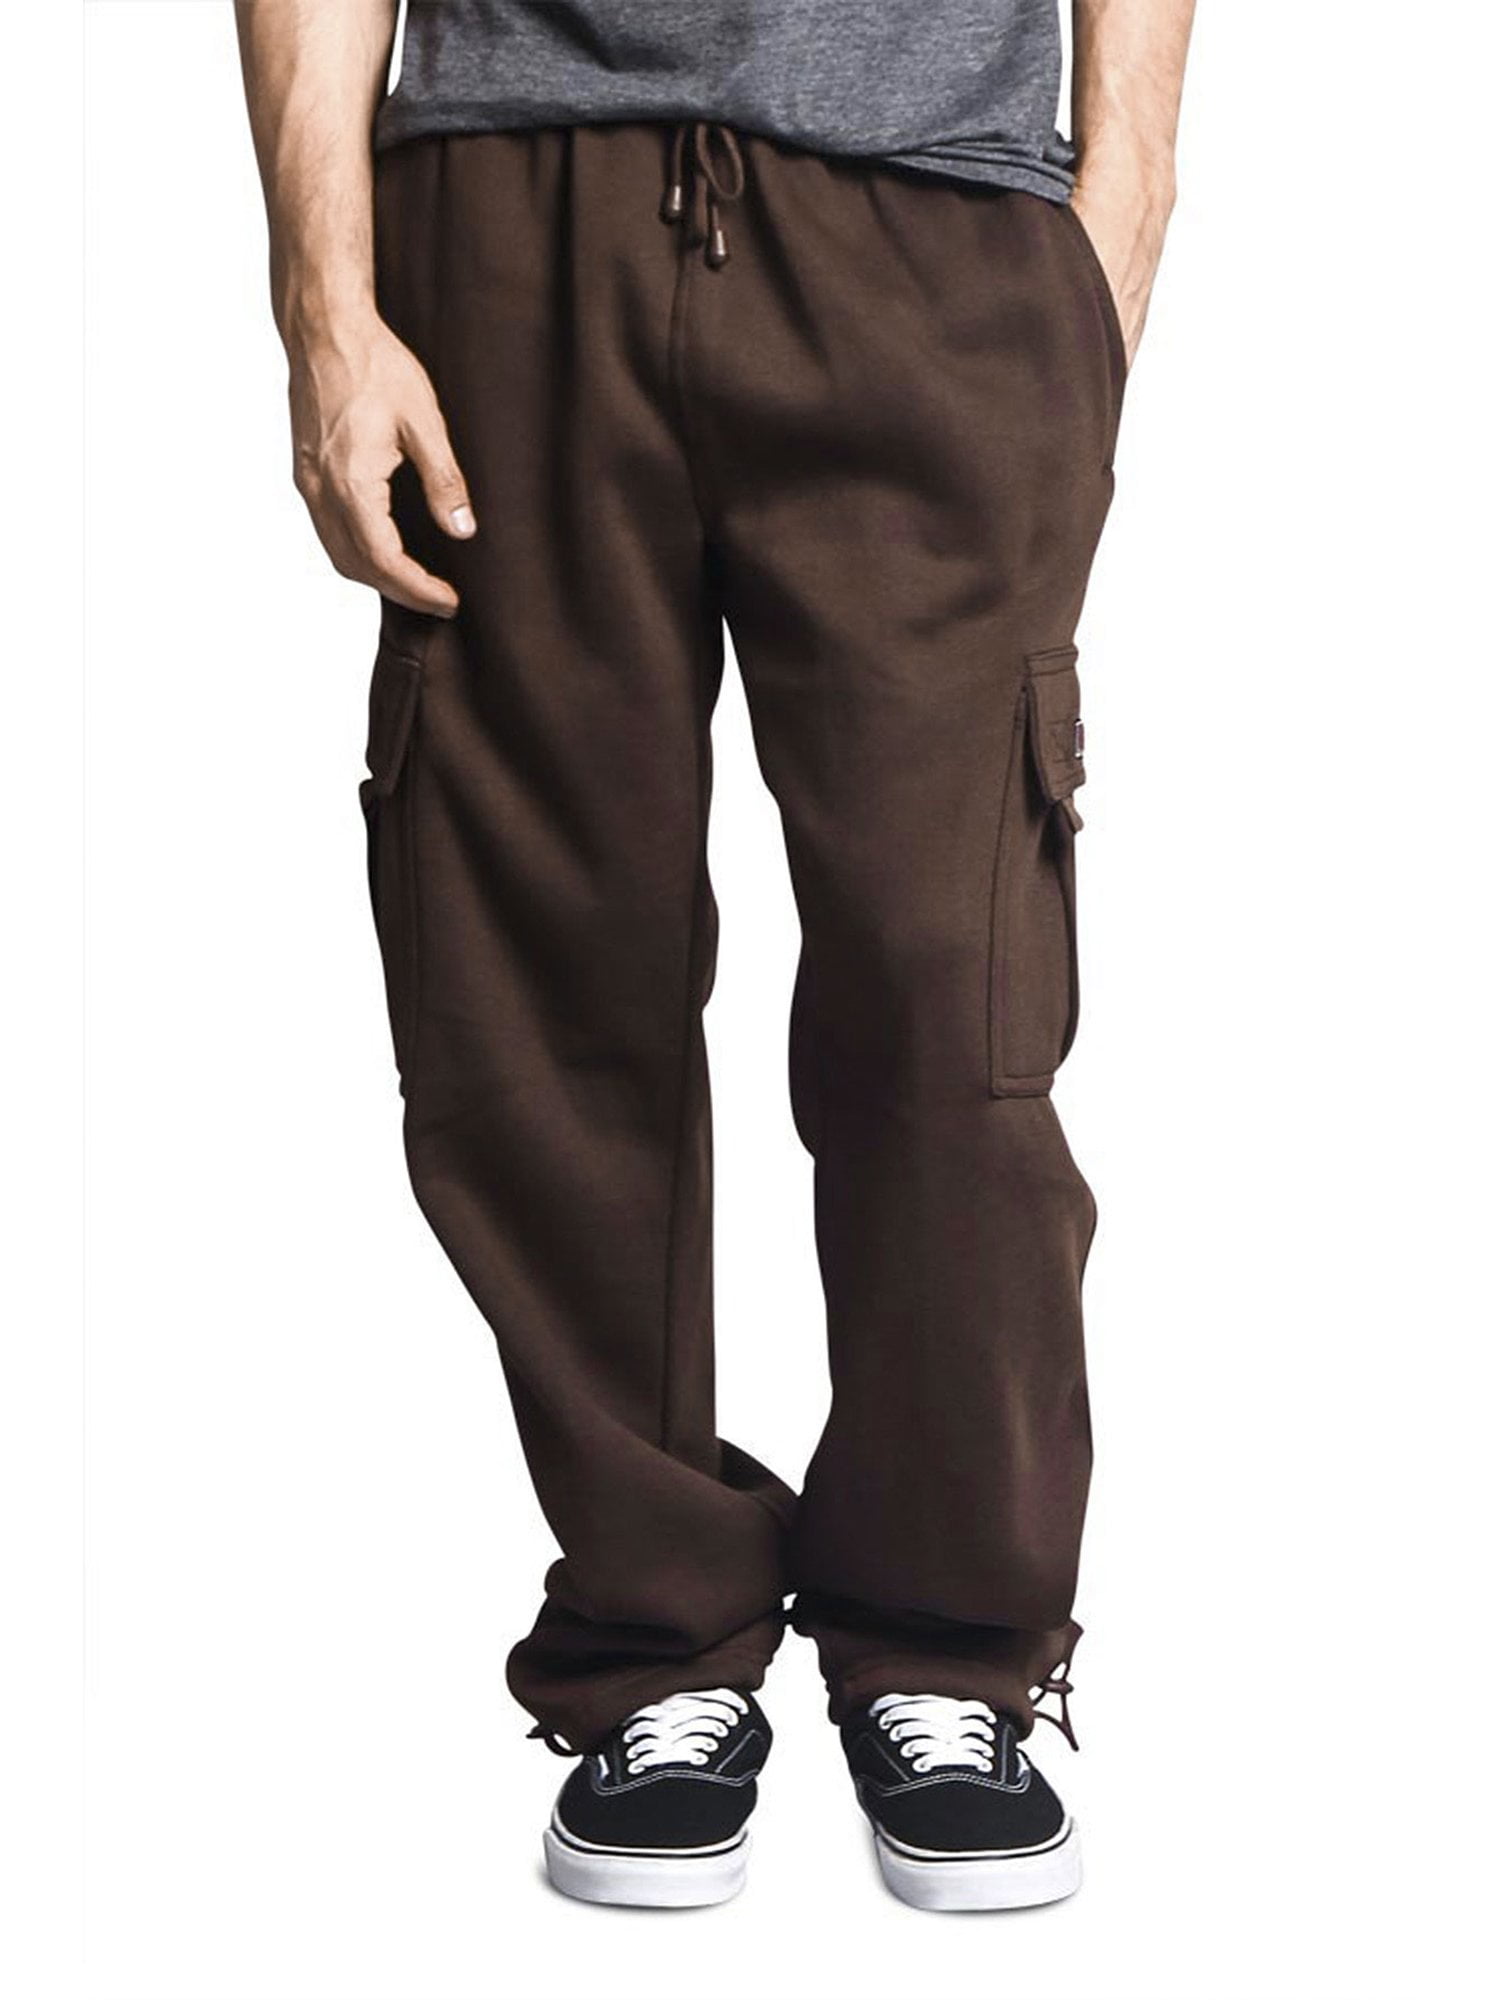 Victorious Men's Heavyweight Fleece Relaxed Lounge Cargo Sweatpants - Brown  - 6X-Large